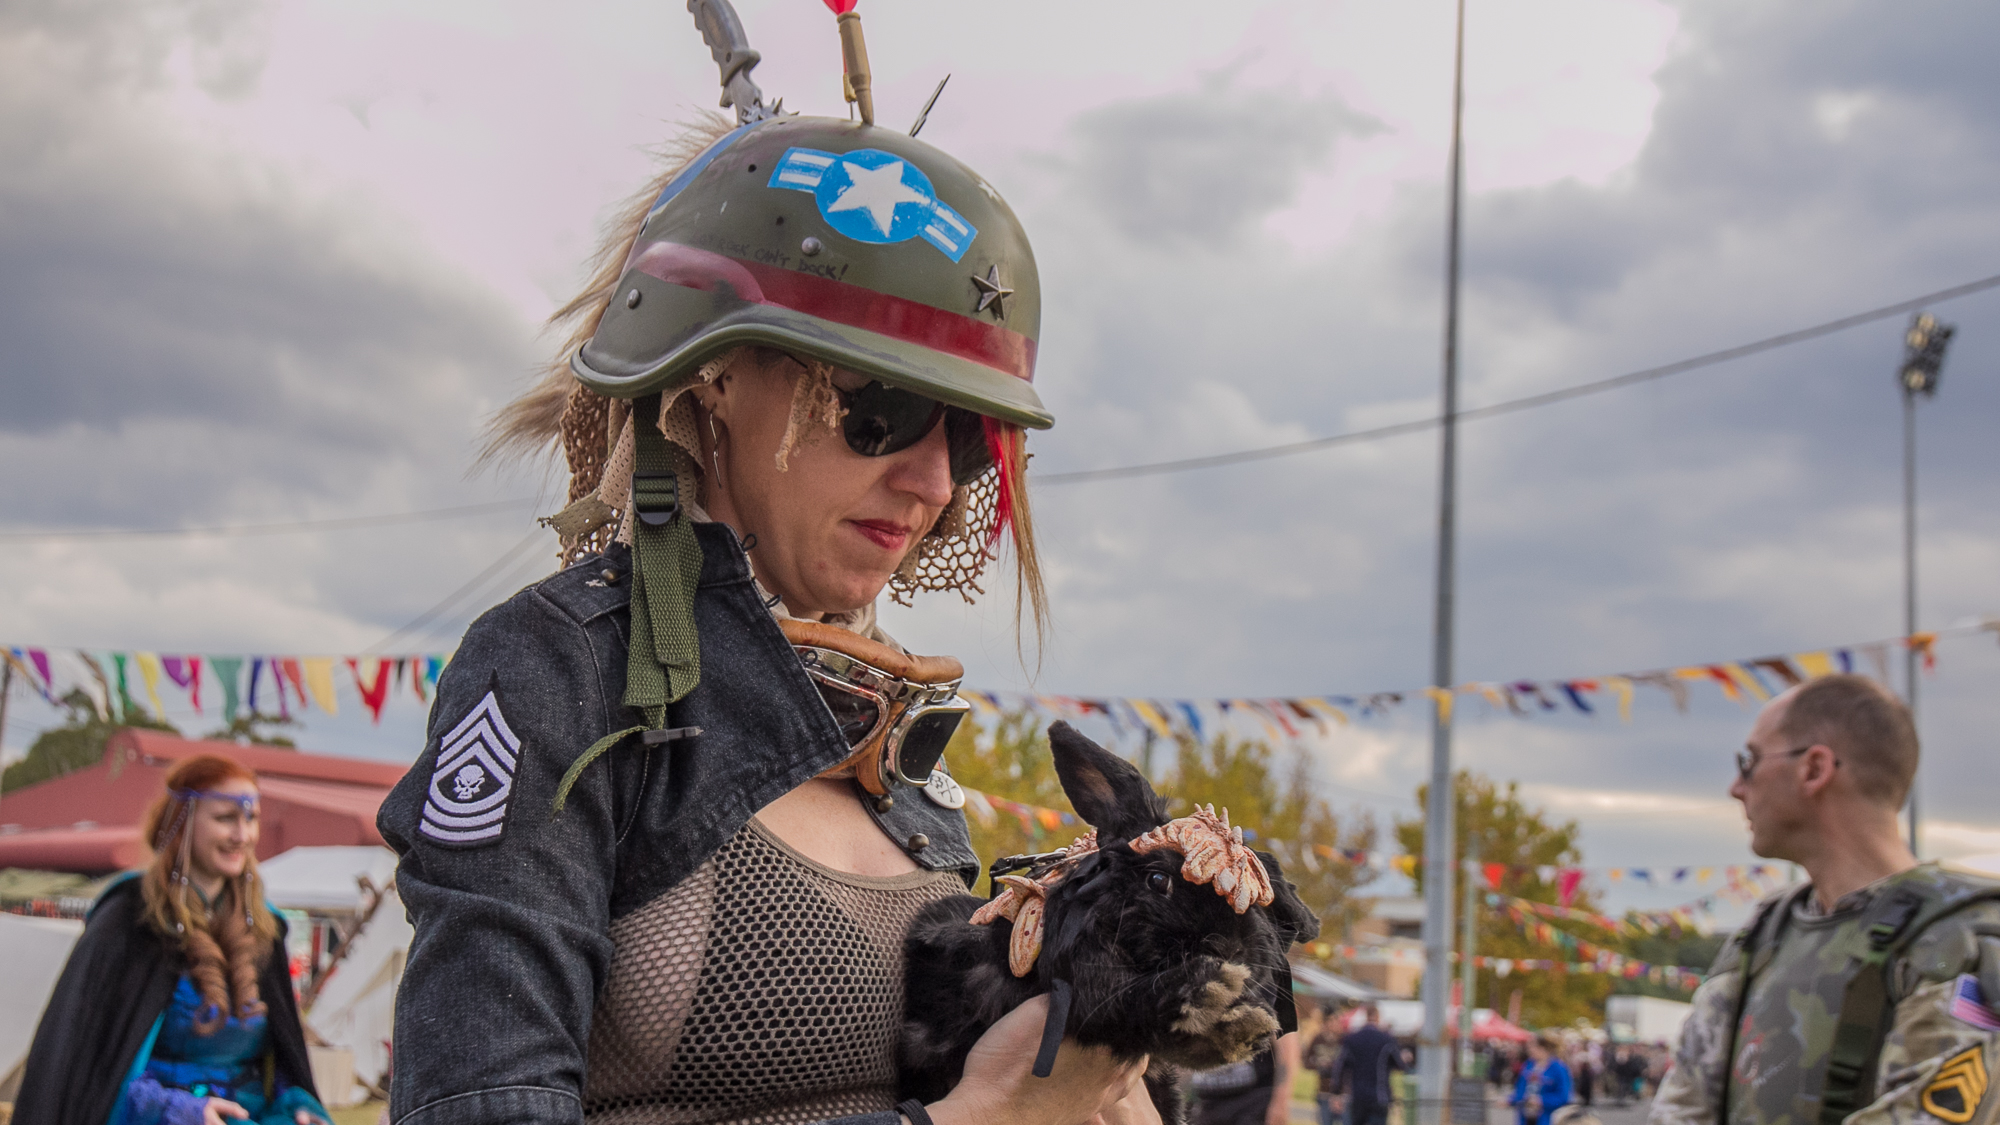 A woman in army gear wtih a rabbit with some armour on it